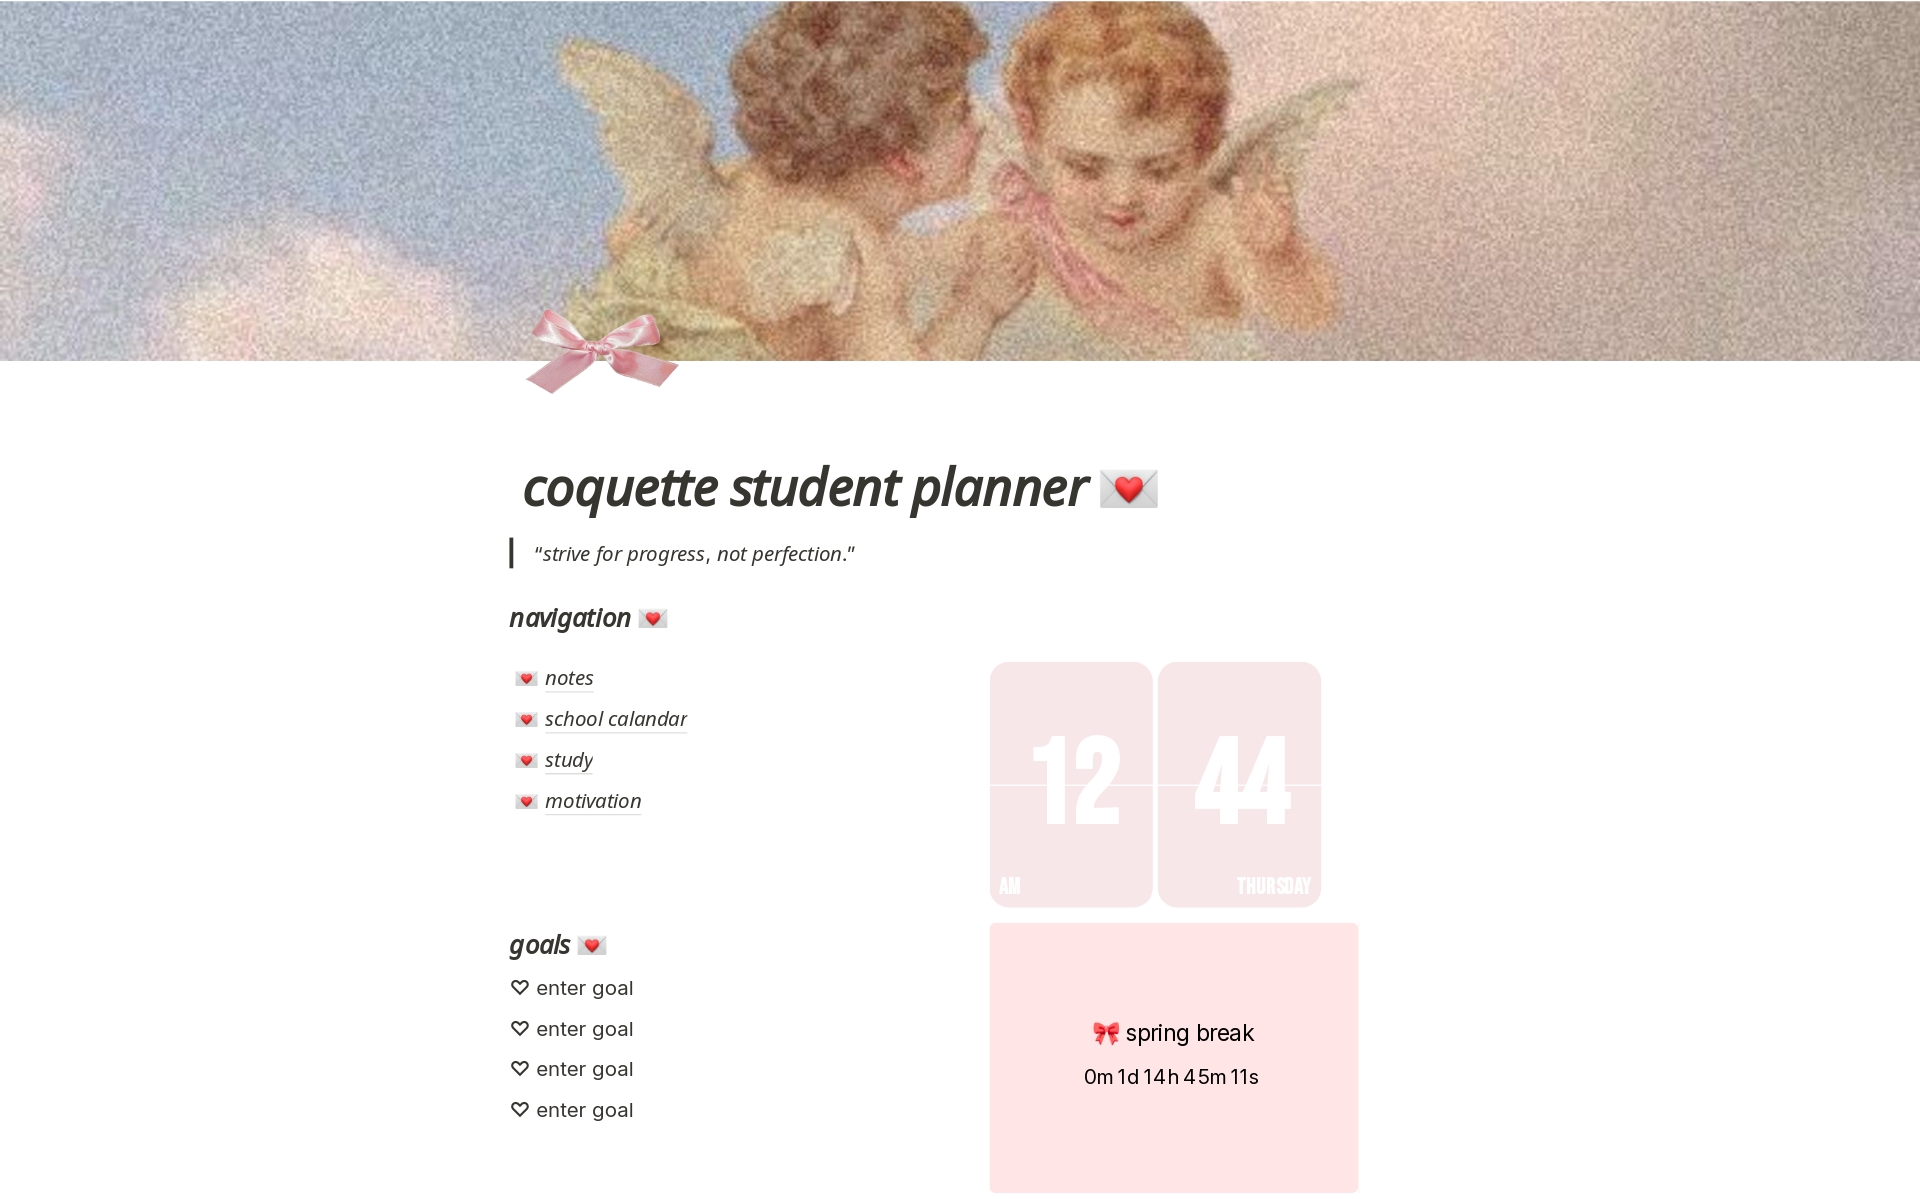 coquette student planner. feel free to edit/modify however you please. if you want a personalized template, email me at aubrey.neubeck@icloud.com